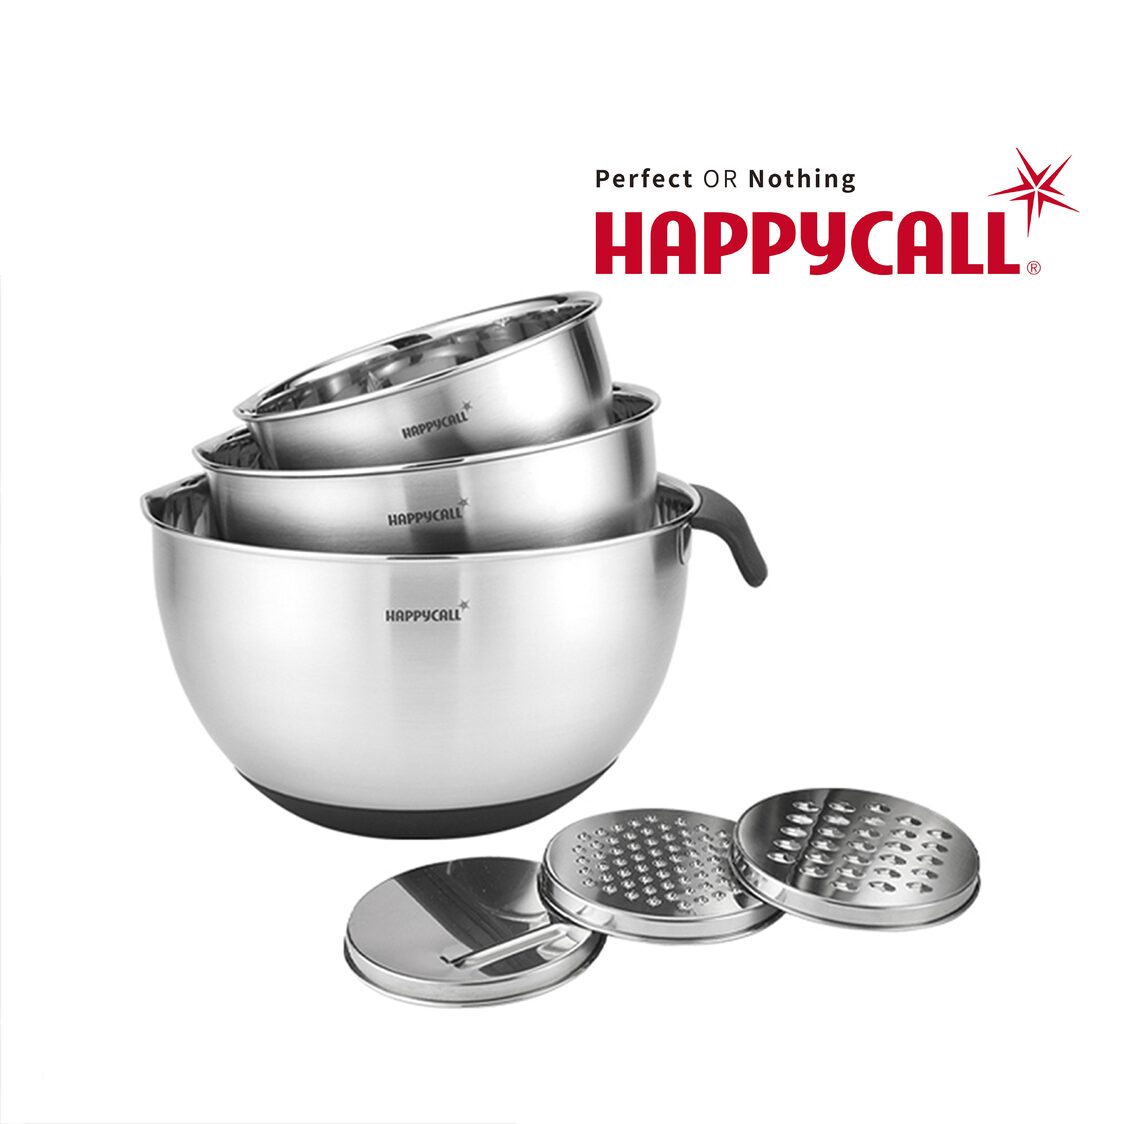 HAPPYCALL 7pc Multi-purpose Mixing Bowls With SlicerGrater Set 4900-0082